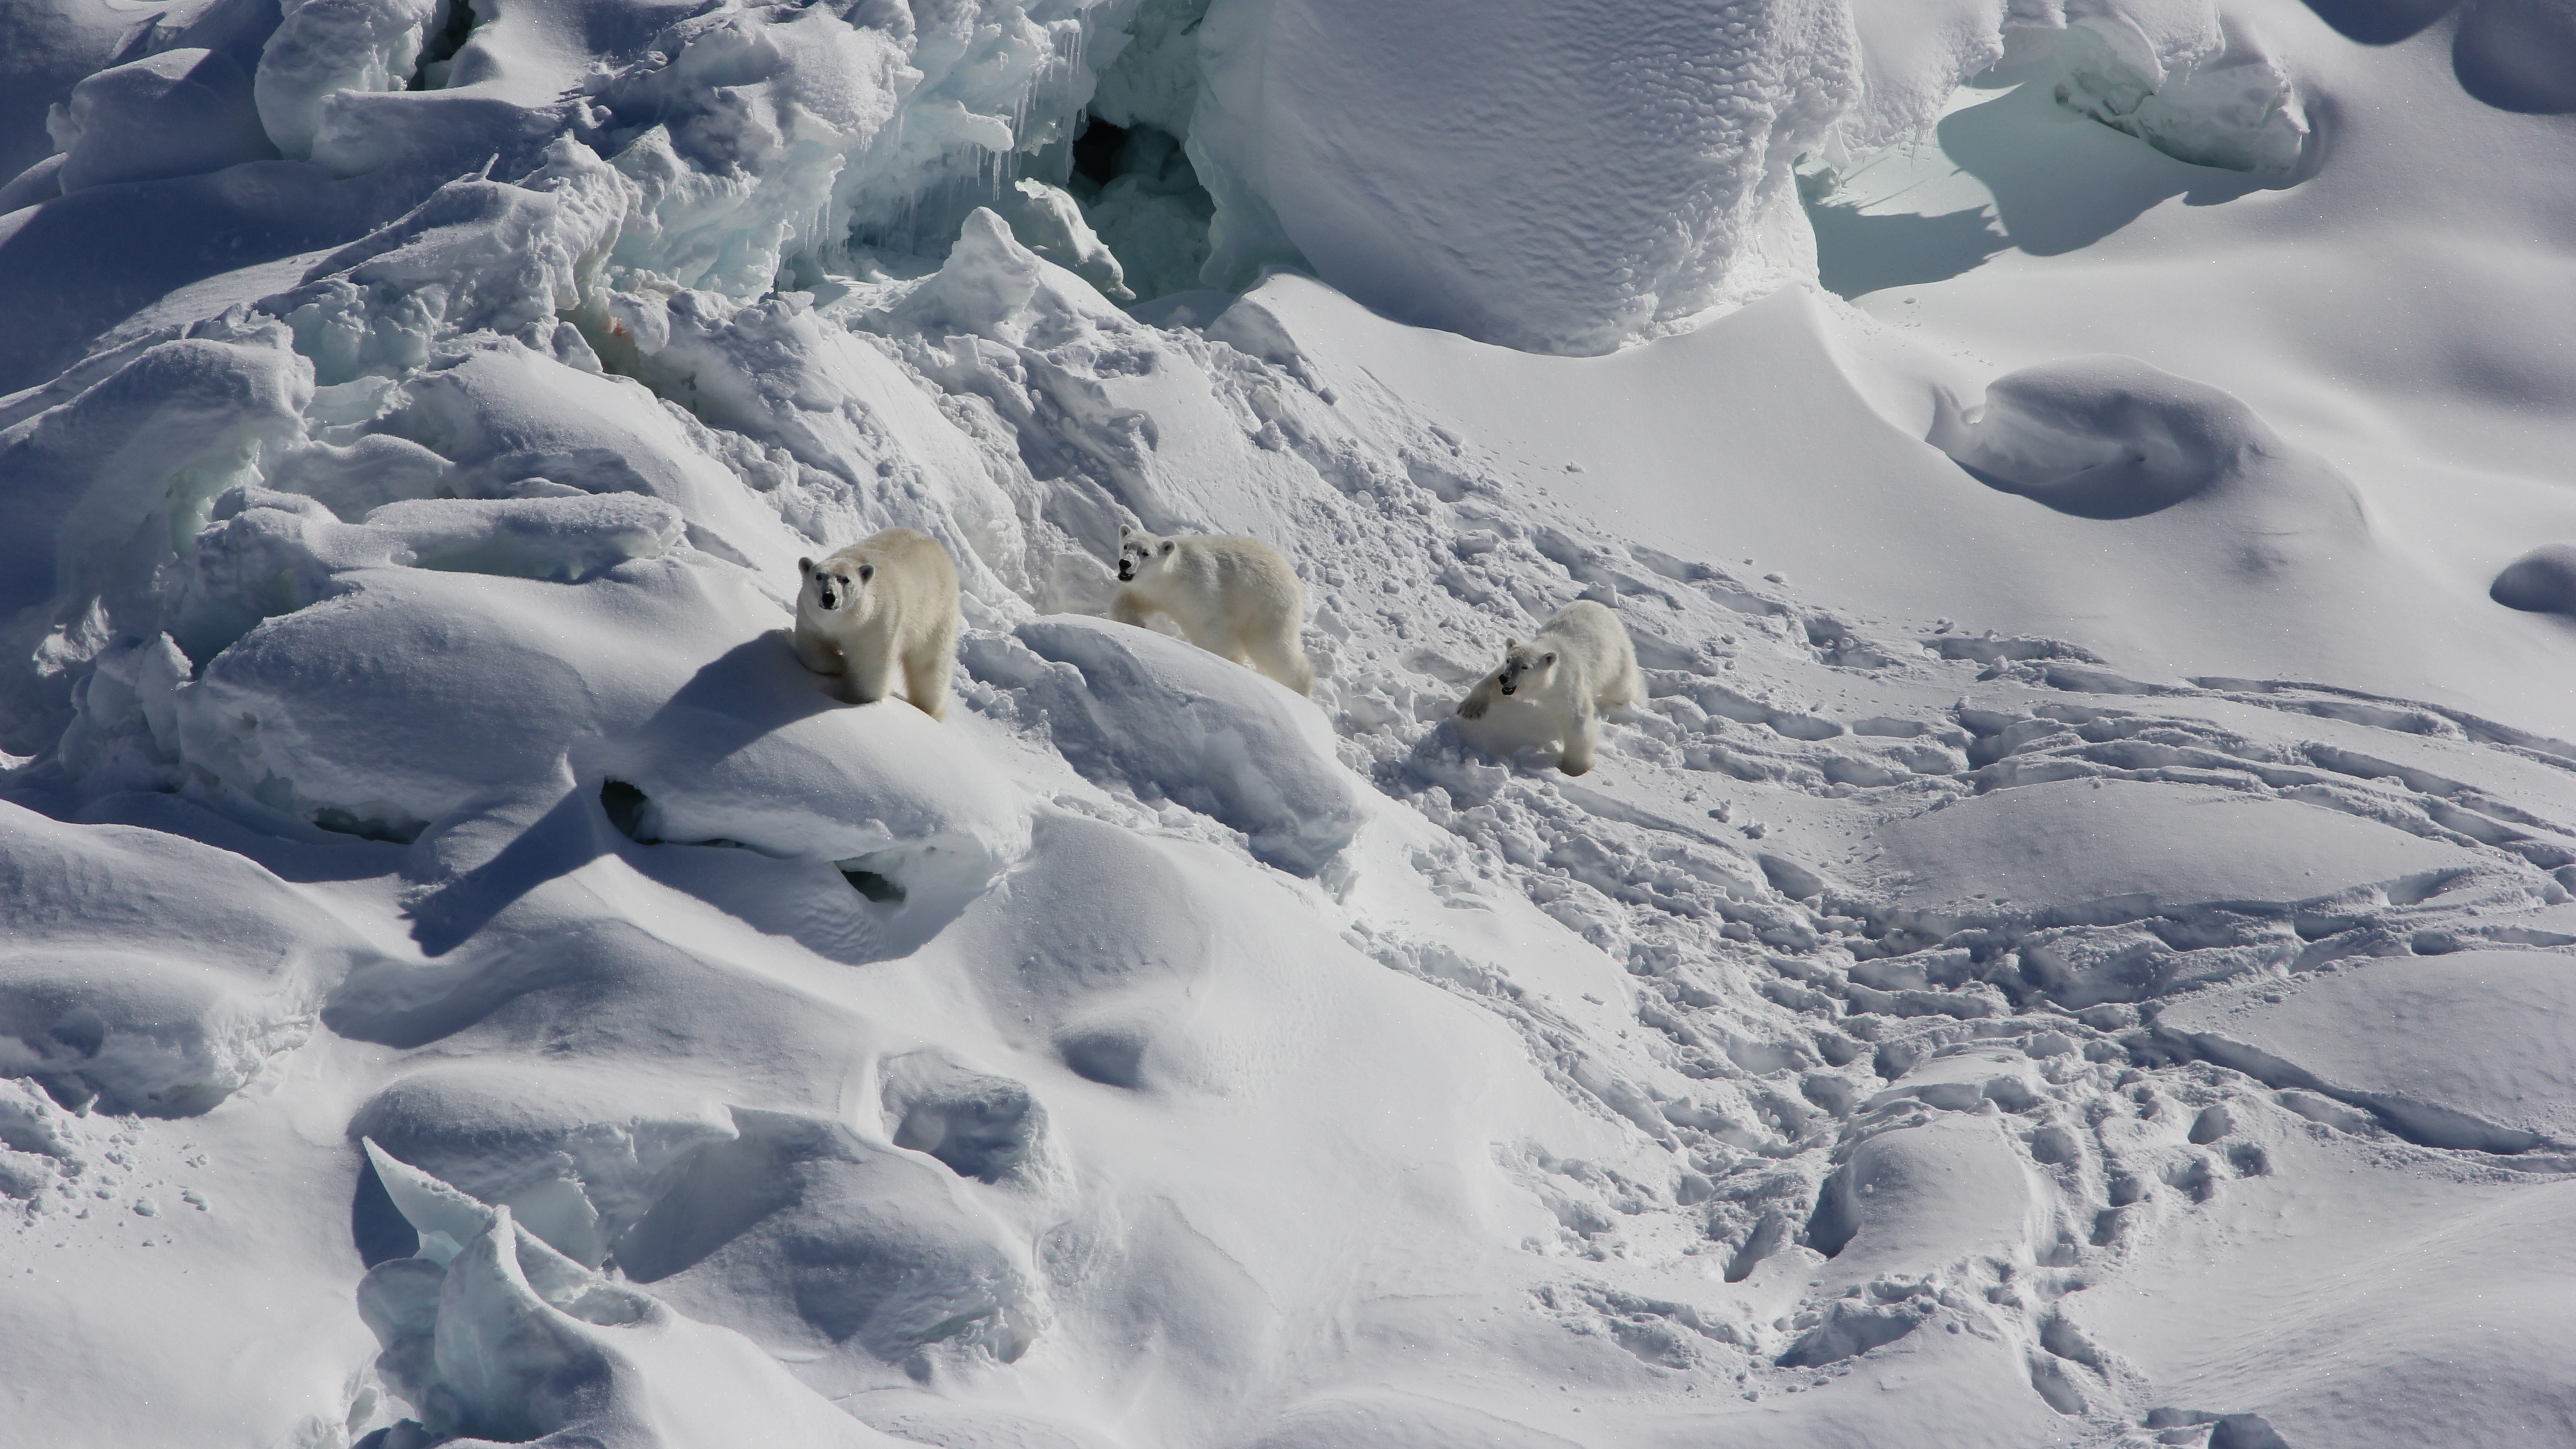 Researchers have discovered a new population of polar bears in Greenland.